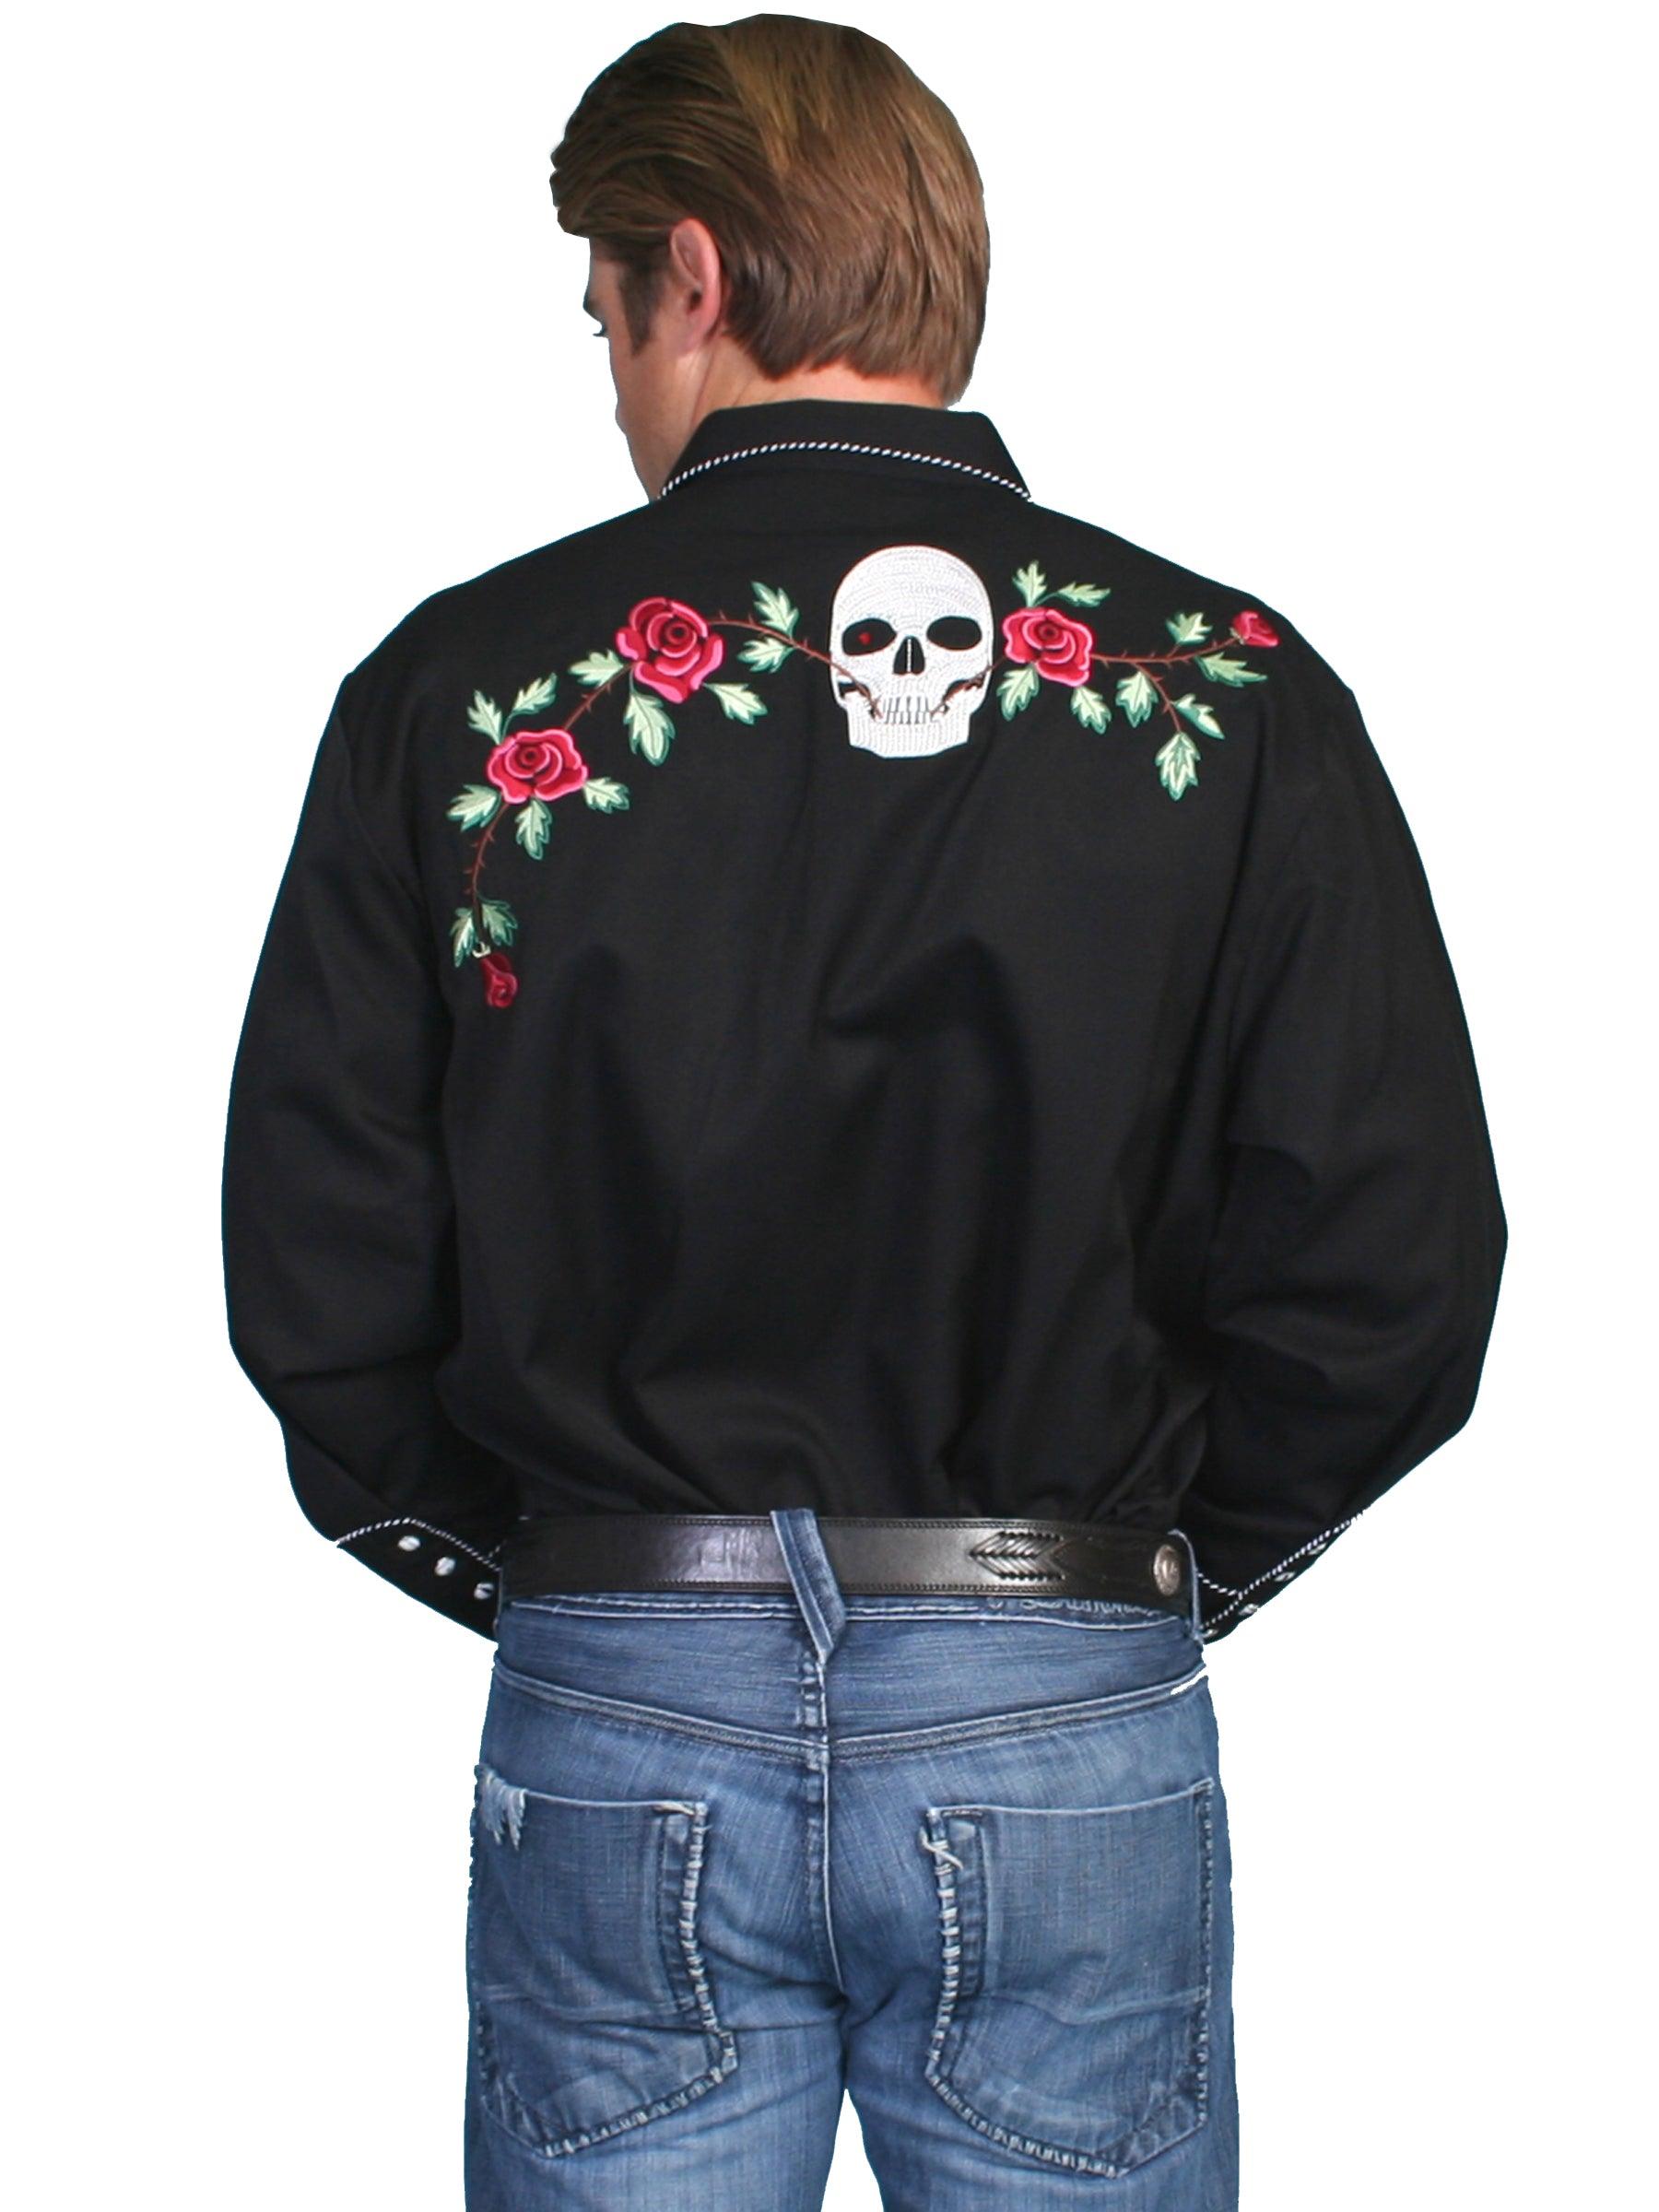 Scully BLACK SKULL/ROSE EMBROIDERED SHIRT - Flyclothing LLC